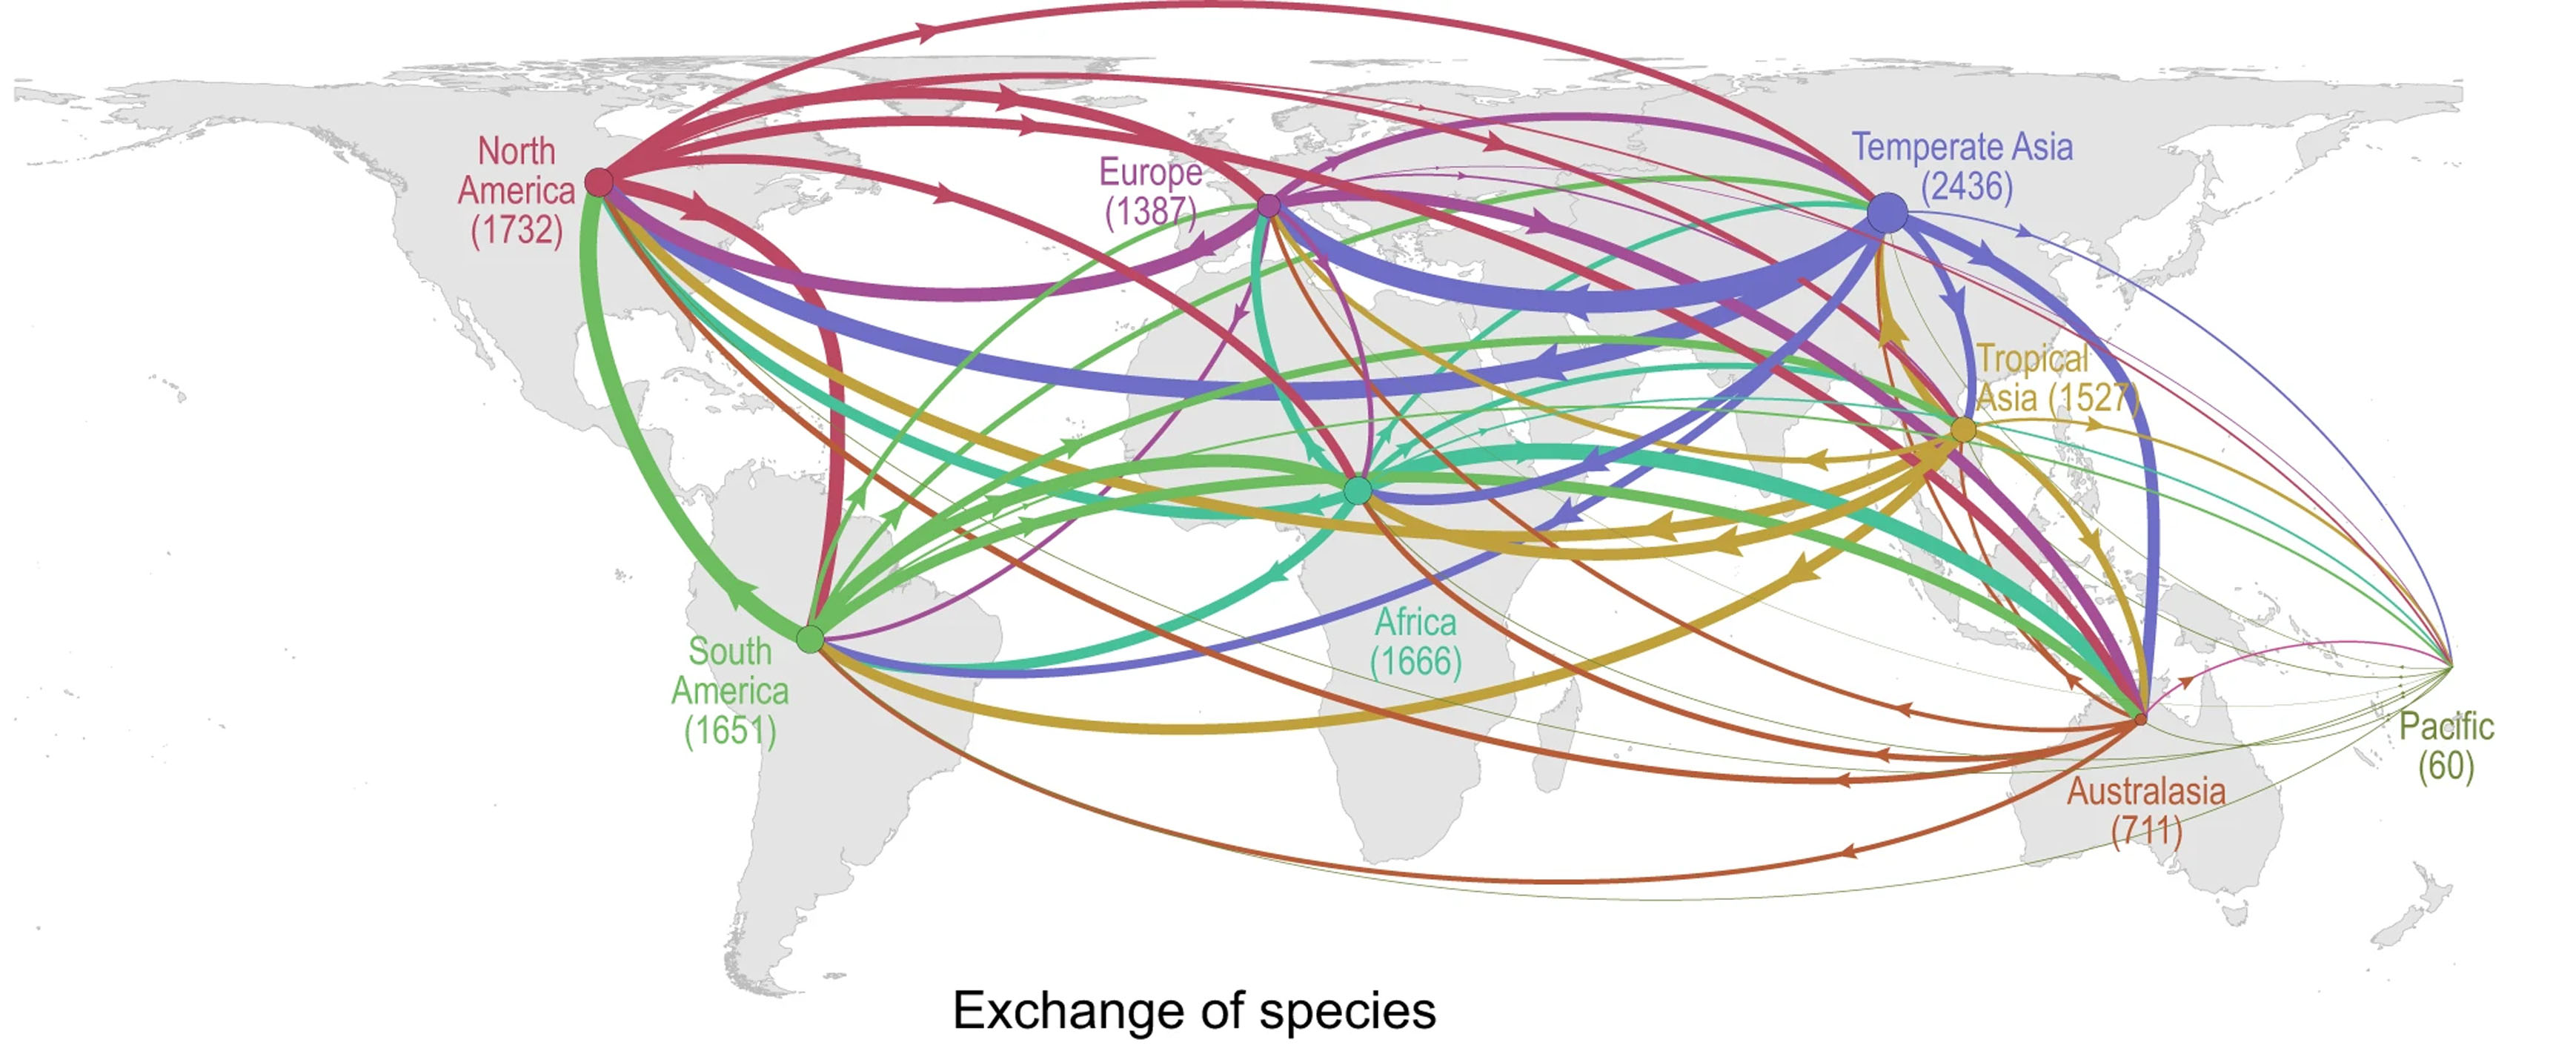 Daru et al 2021. Non-native species originating (outbound arrow) or received (inbound arrows) between each continent. Line thickness is proportional to the number of species exchanged. 2